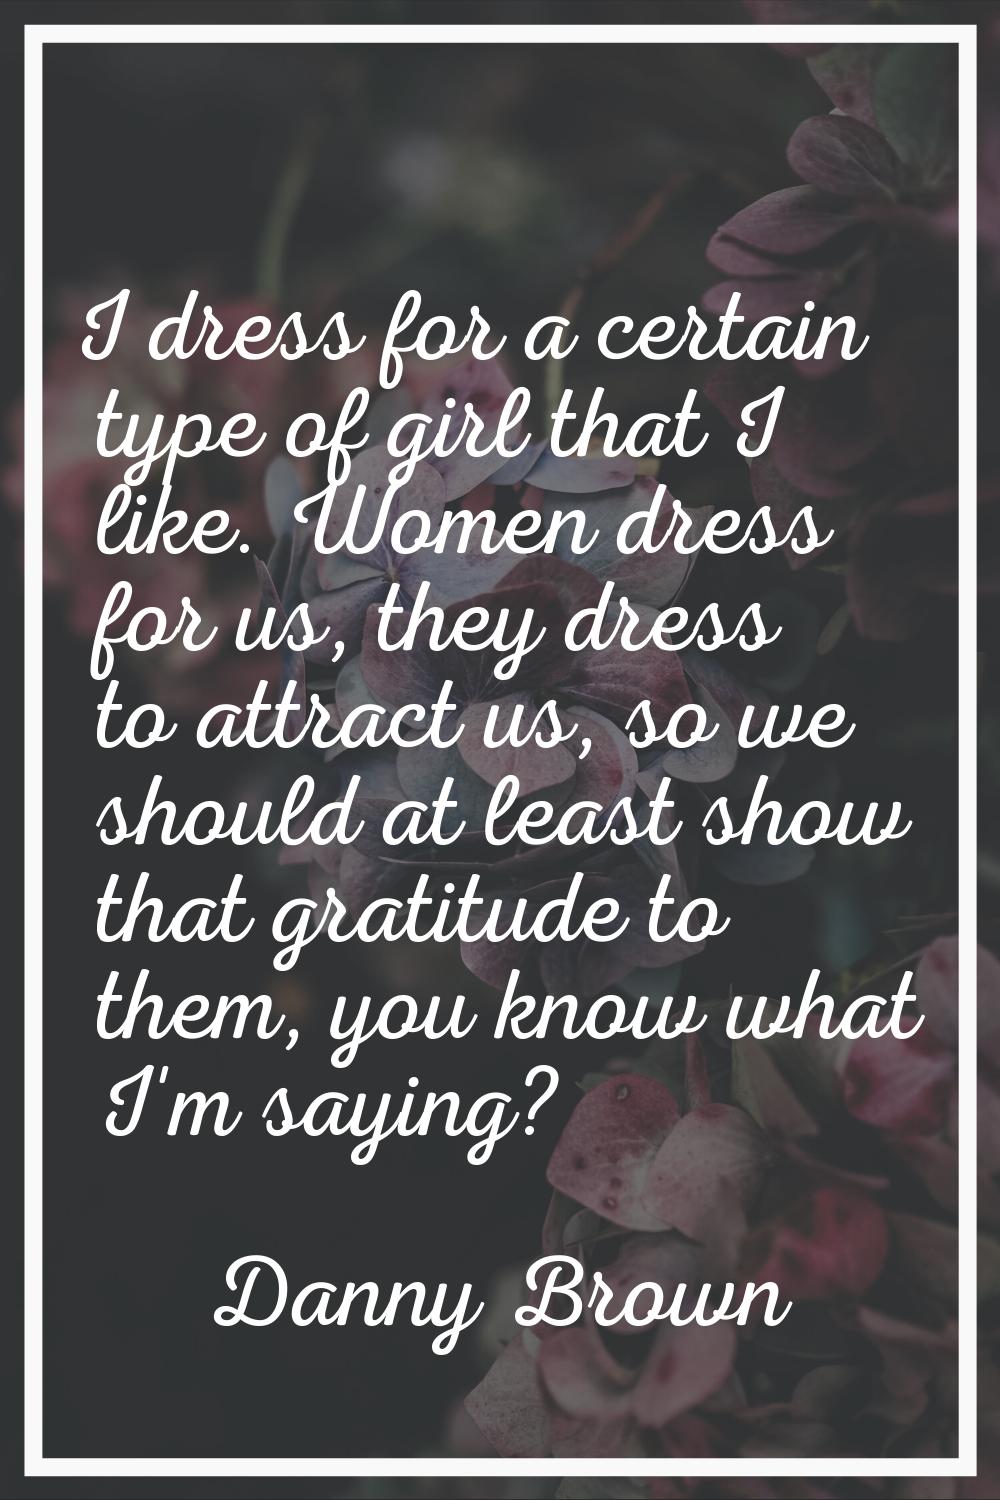 I dress for a certain type of girl that I like. Women dress for us, they dress to attract us, so we